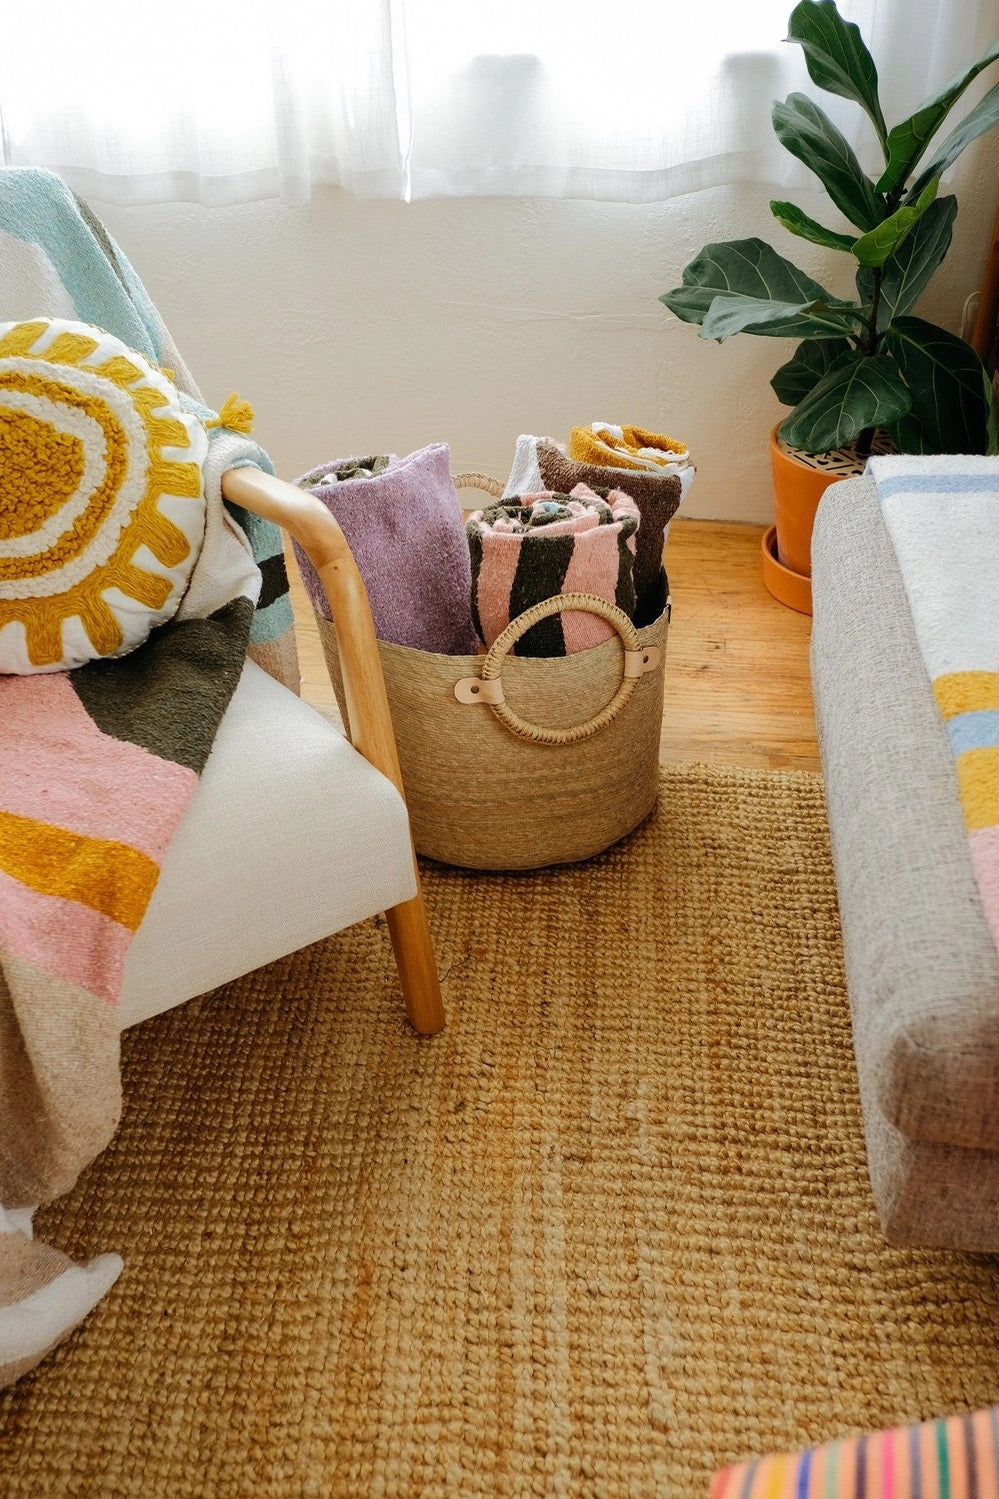 A Caminito Large Woven Floor Basket filled with colorful beach towels rests next to a chair in a sun room.